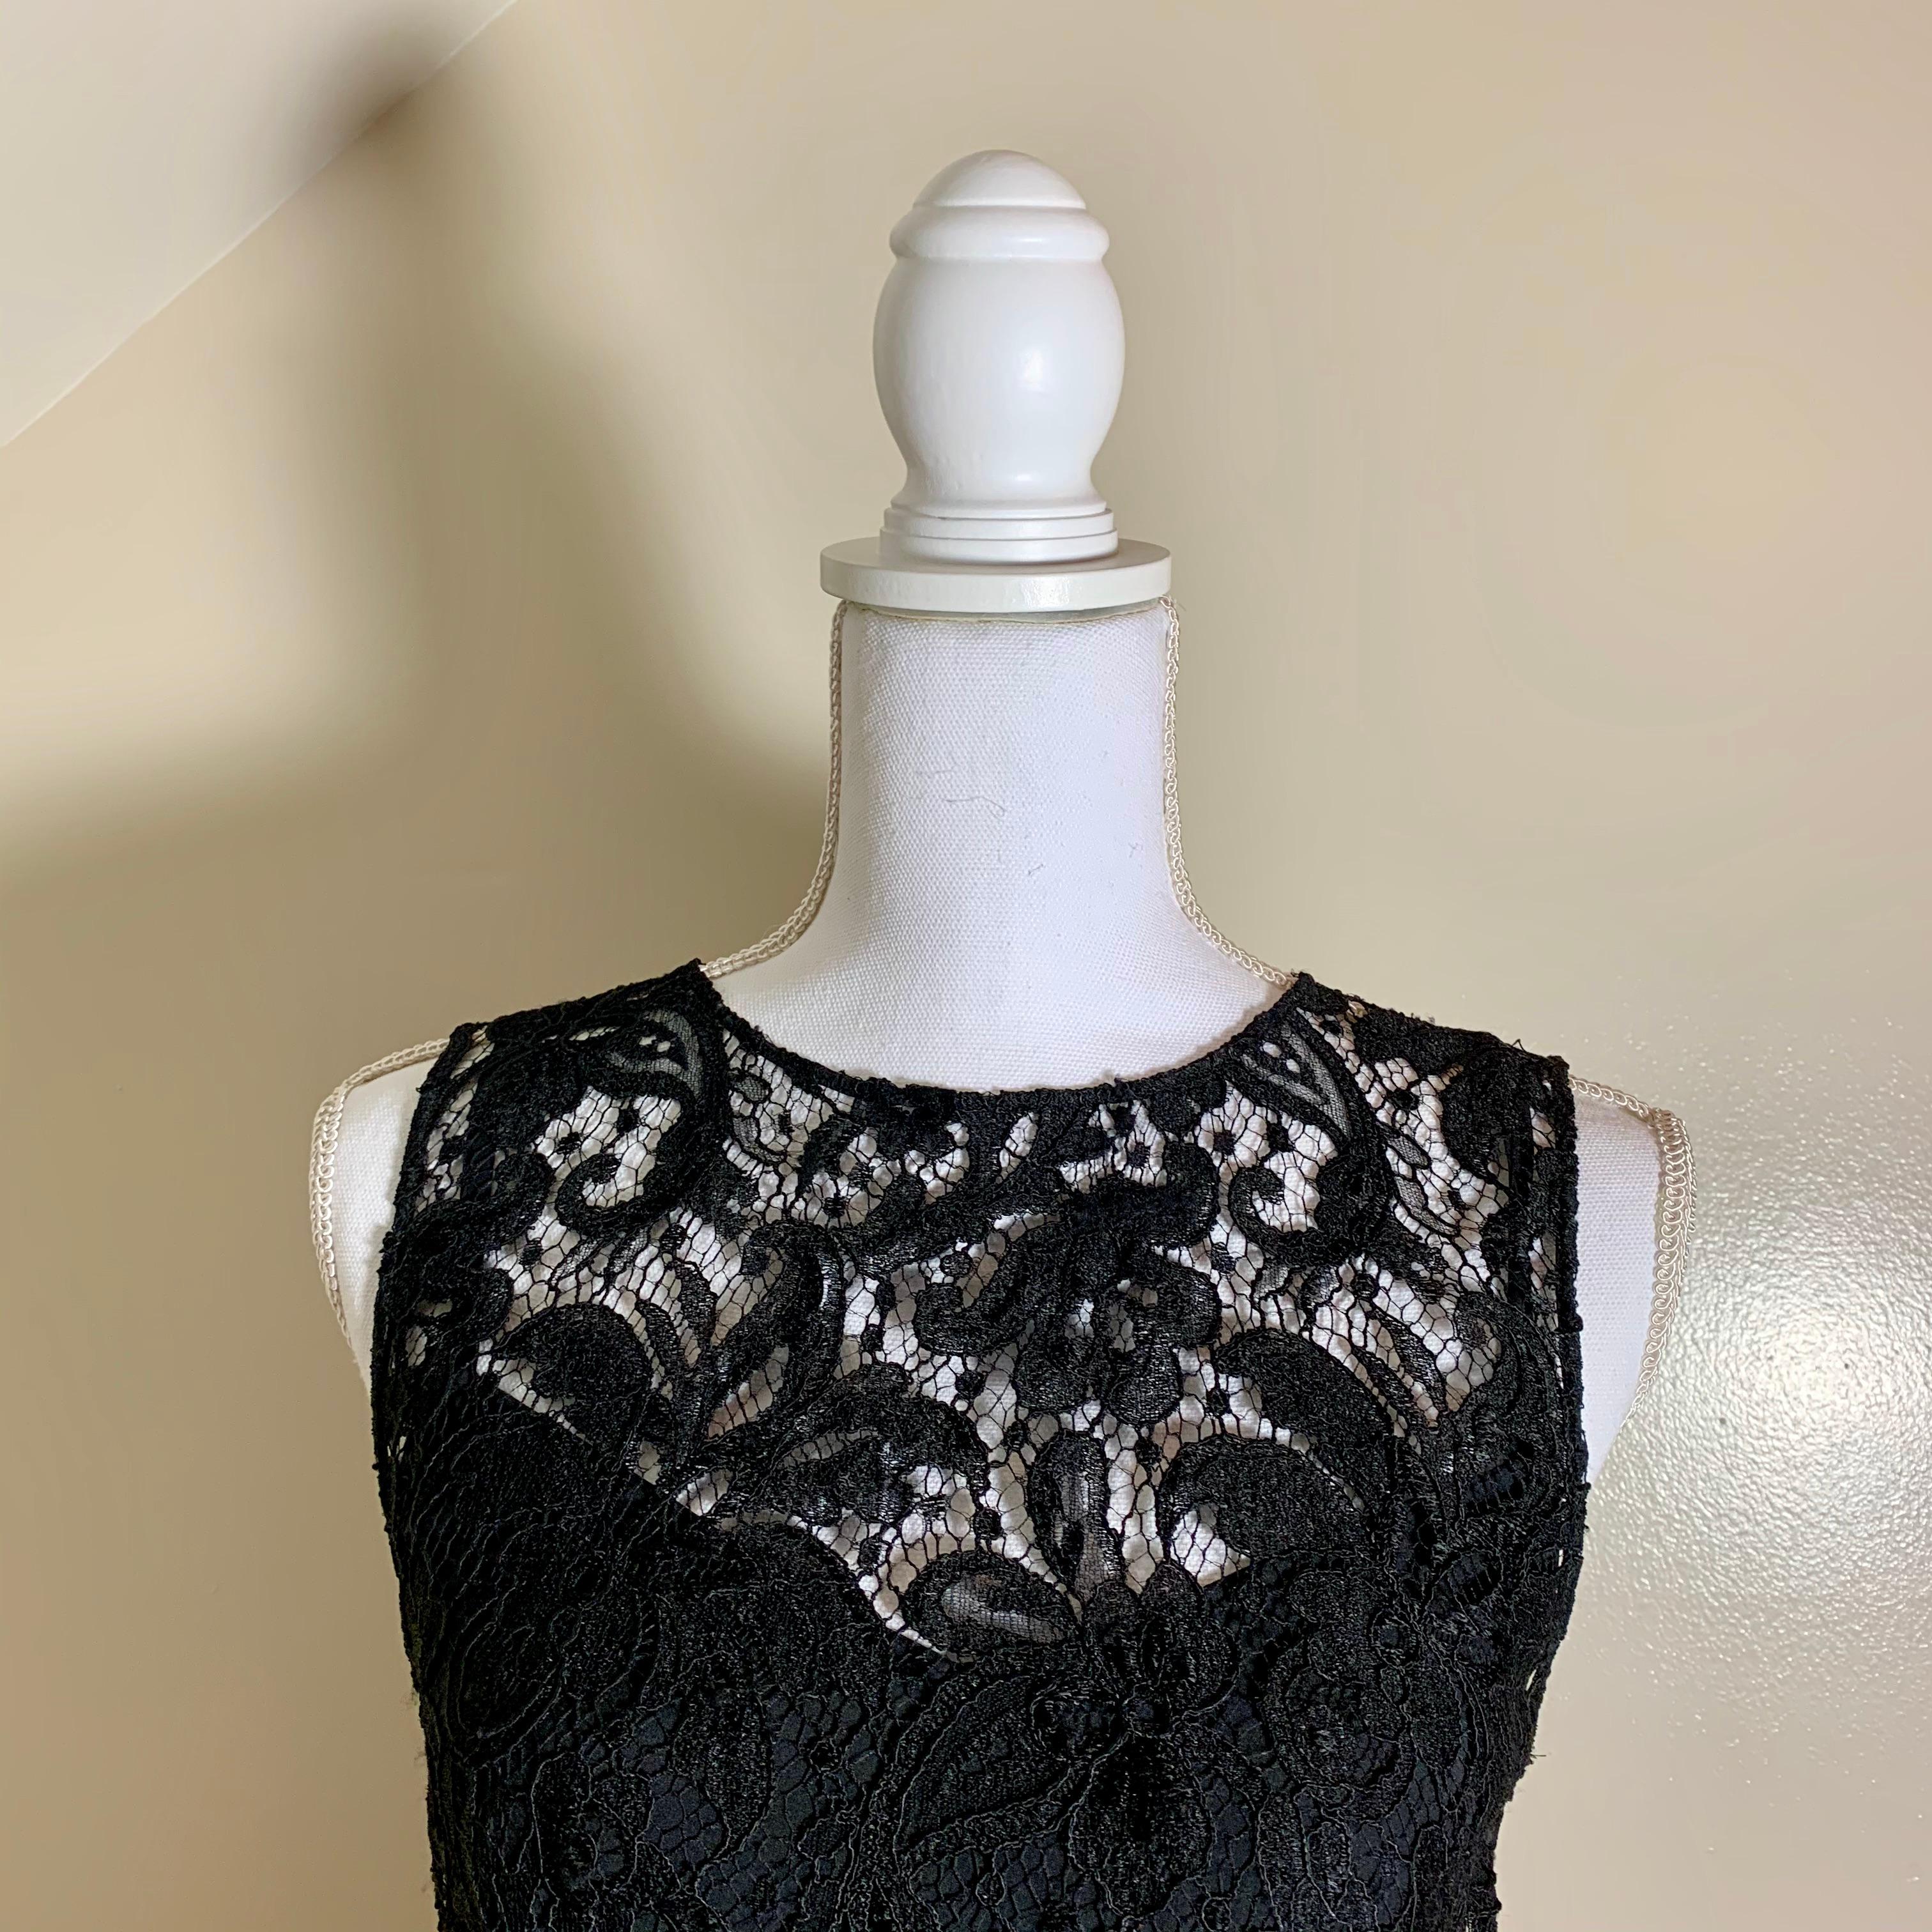 From Dolce & Gabbana, a self-lined black lace sleeveless dress. An iconic D&G design with variations seen in every one of their collections.

Beautiful Italian cotton lace in black, over a silk slip lining. Both the slip and the lace shell have